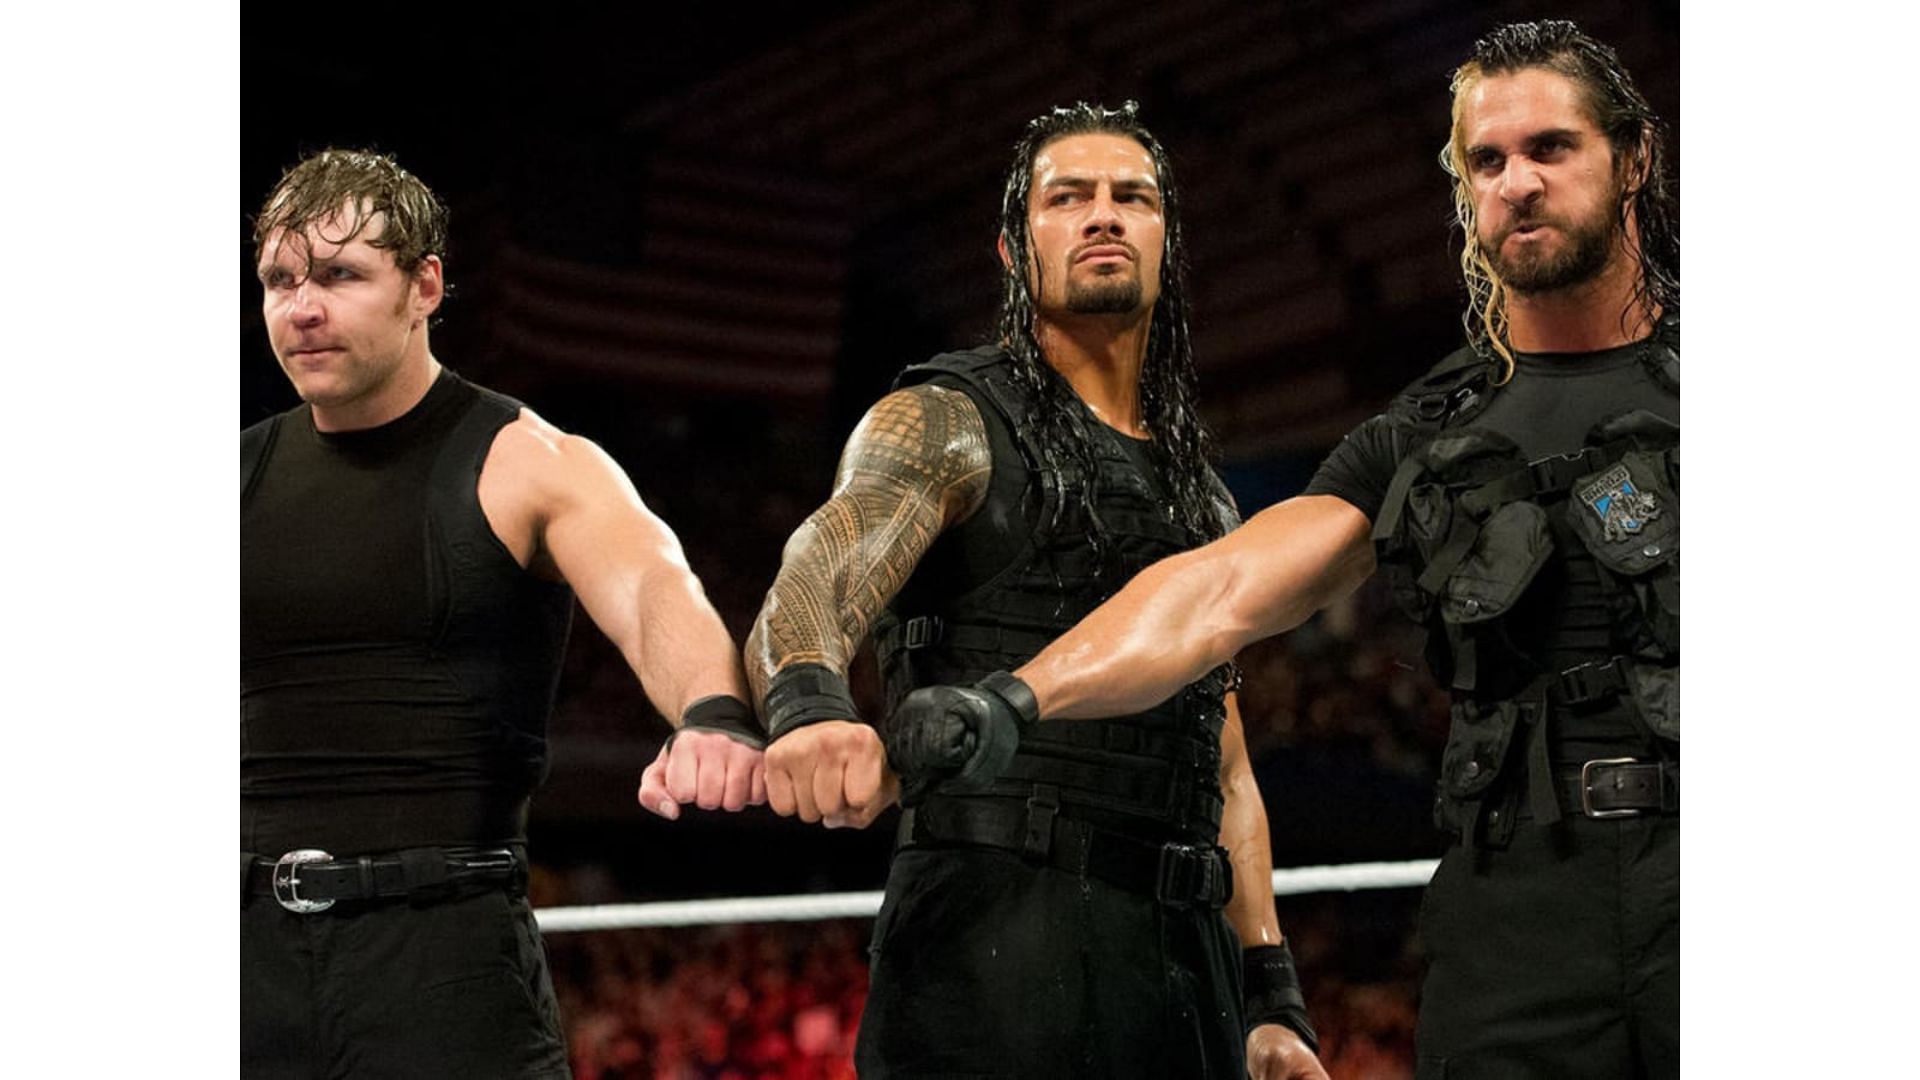 The three Shield members make up the top 3 of this year&#039;s PWI 500